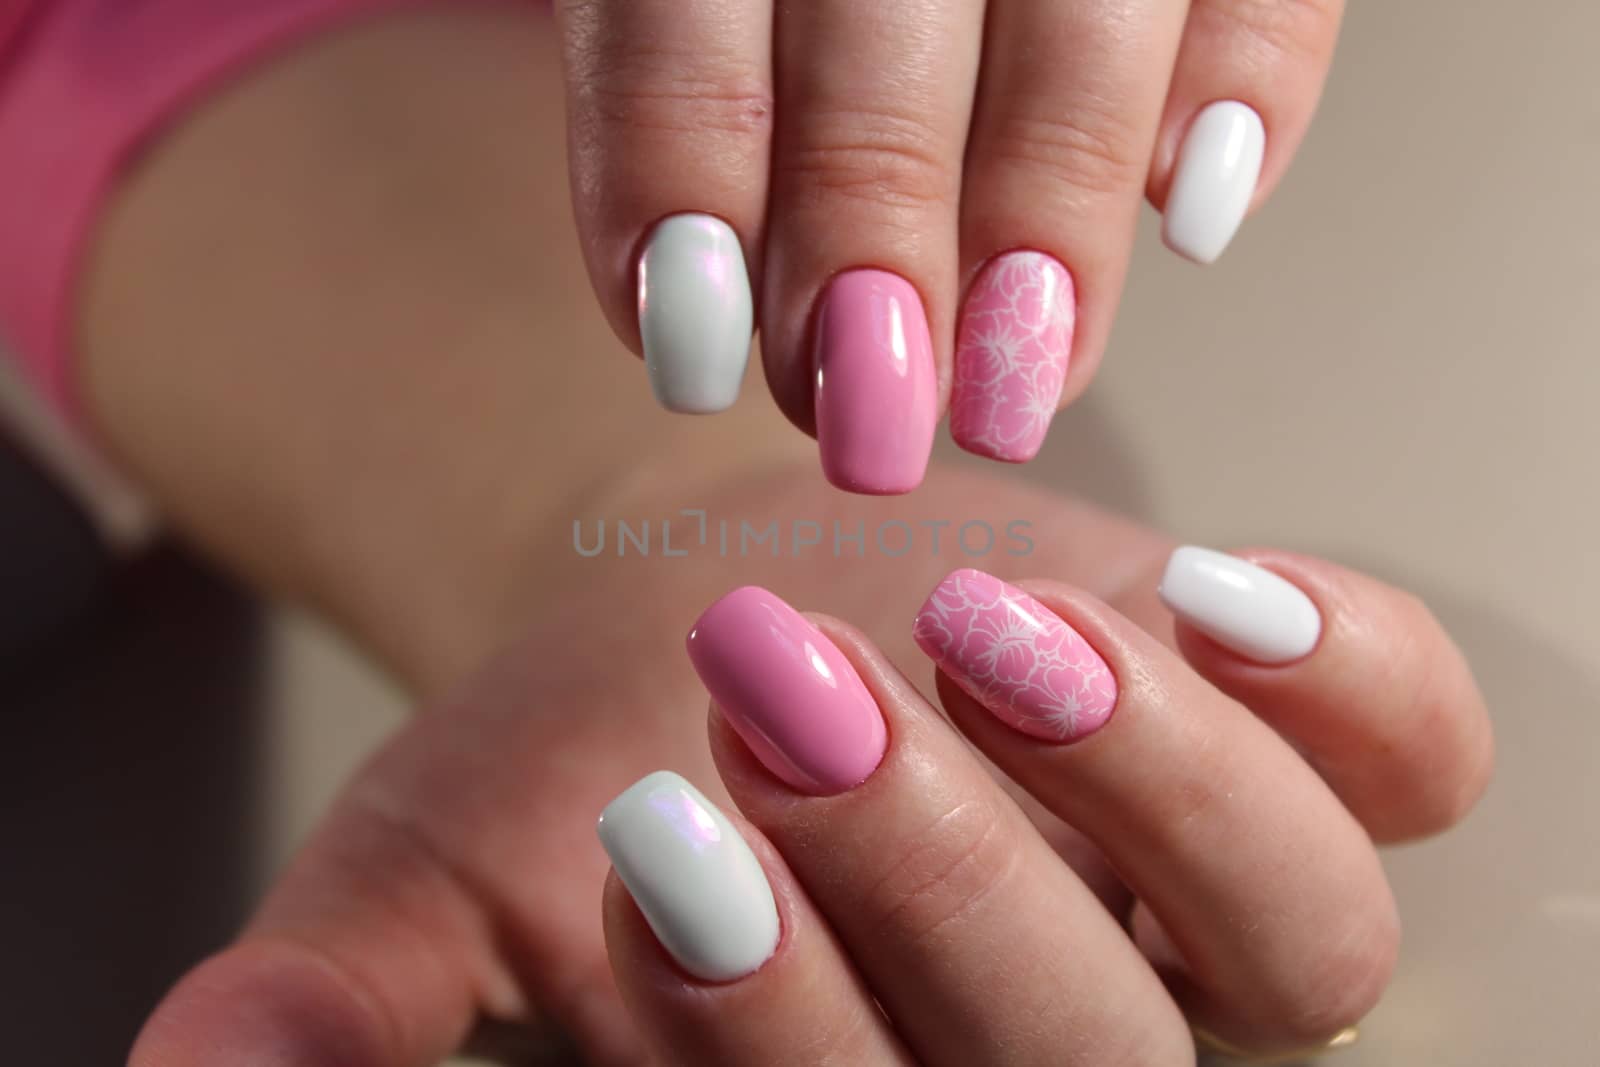 Cute design of manicure Pink and white color